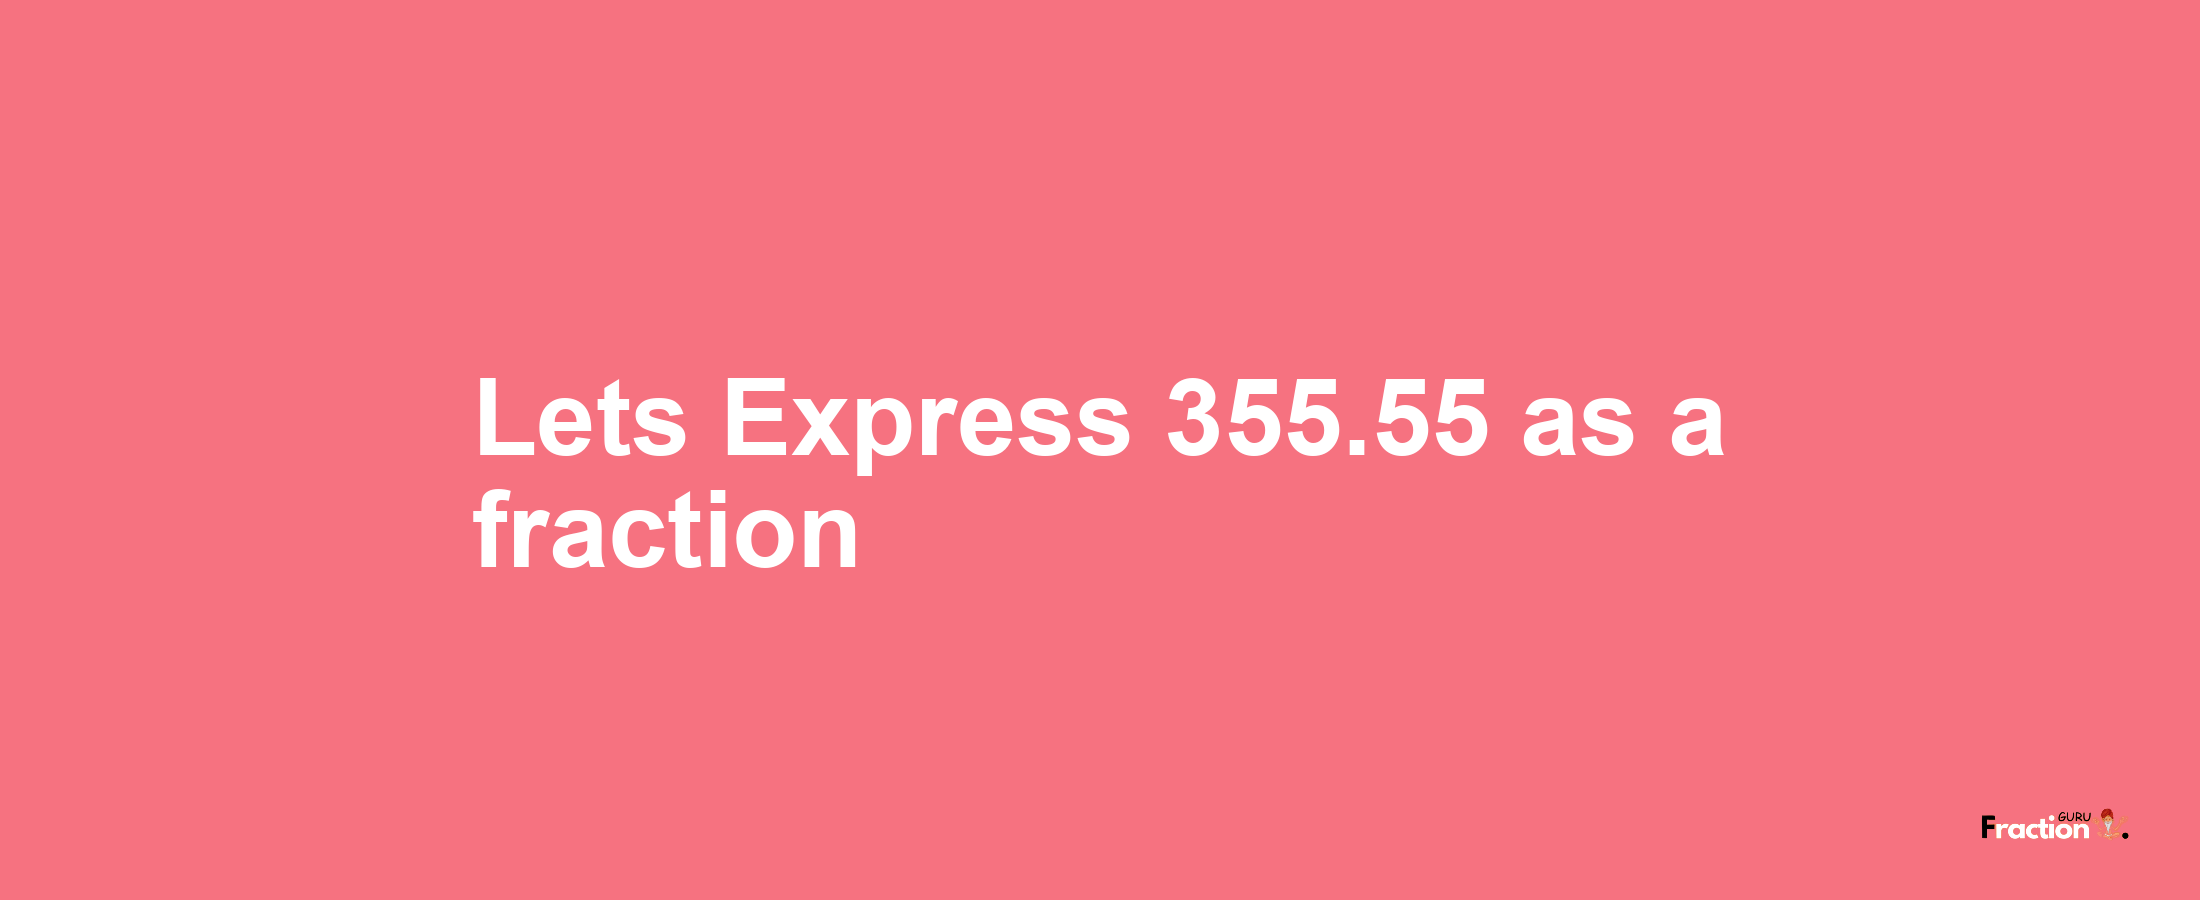 Lets Express 355.55 as afraction